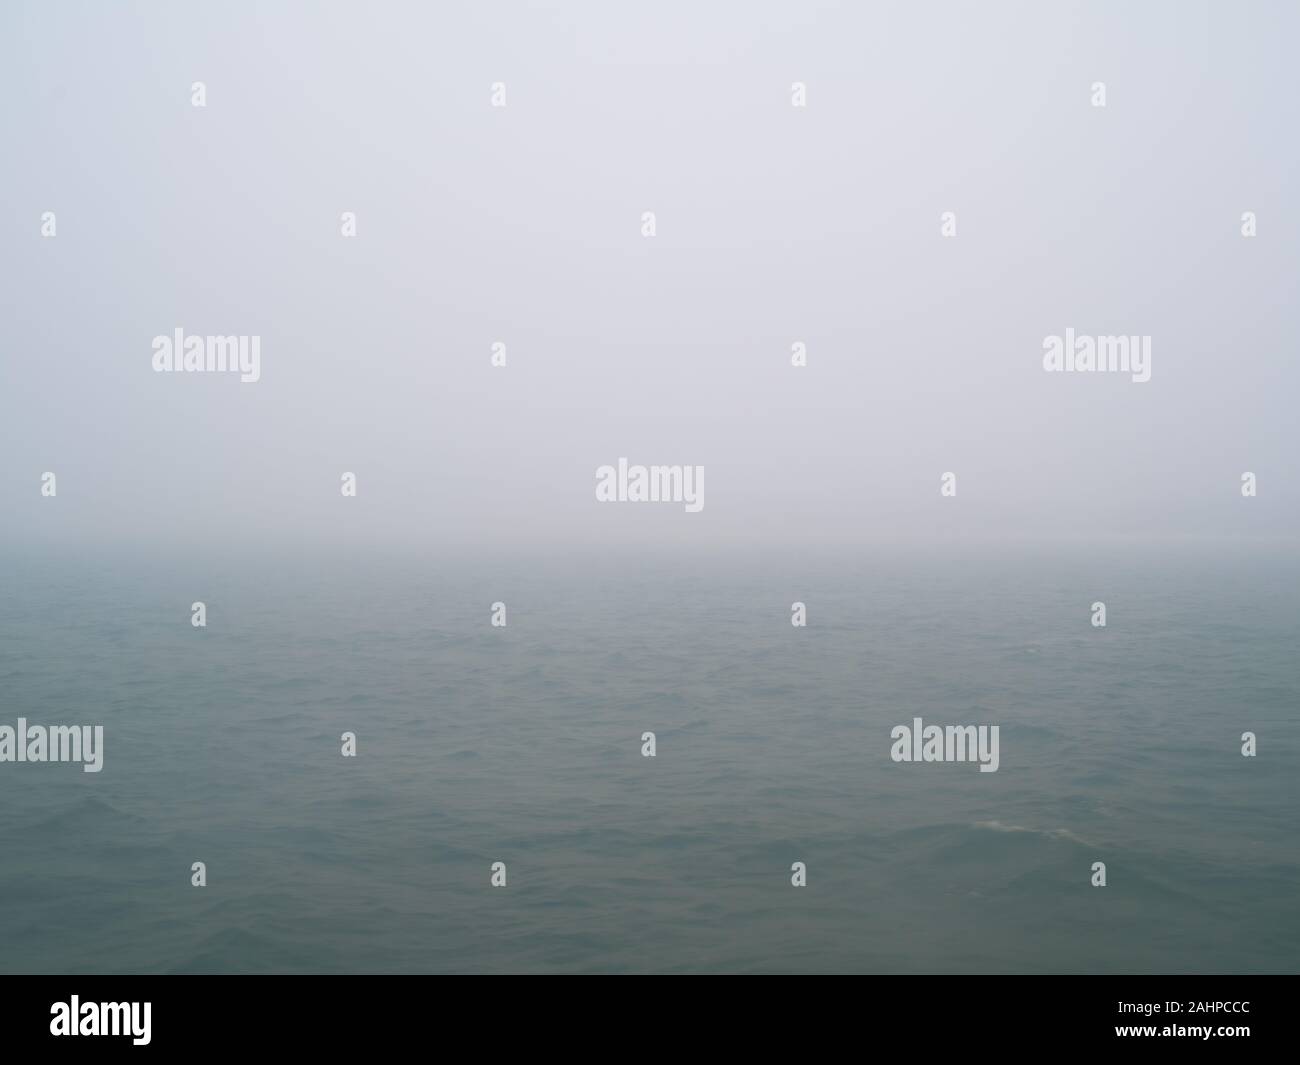 Low Visibility On The Ocean In The Mornings Stock Photo